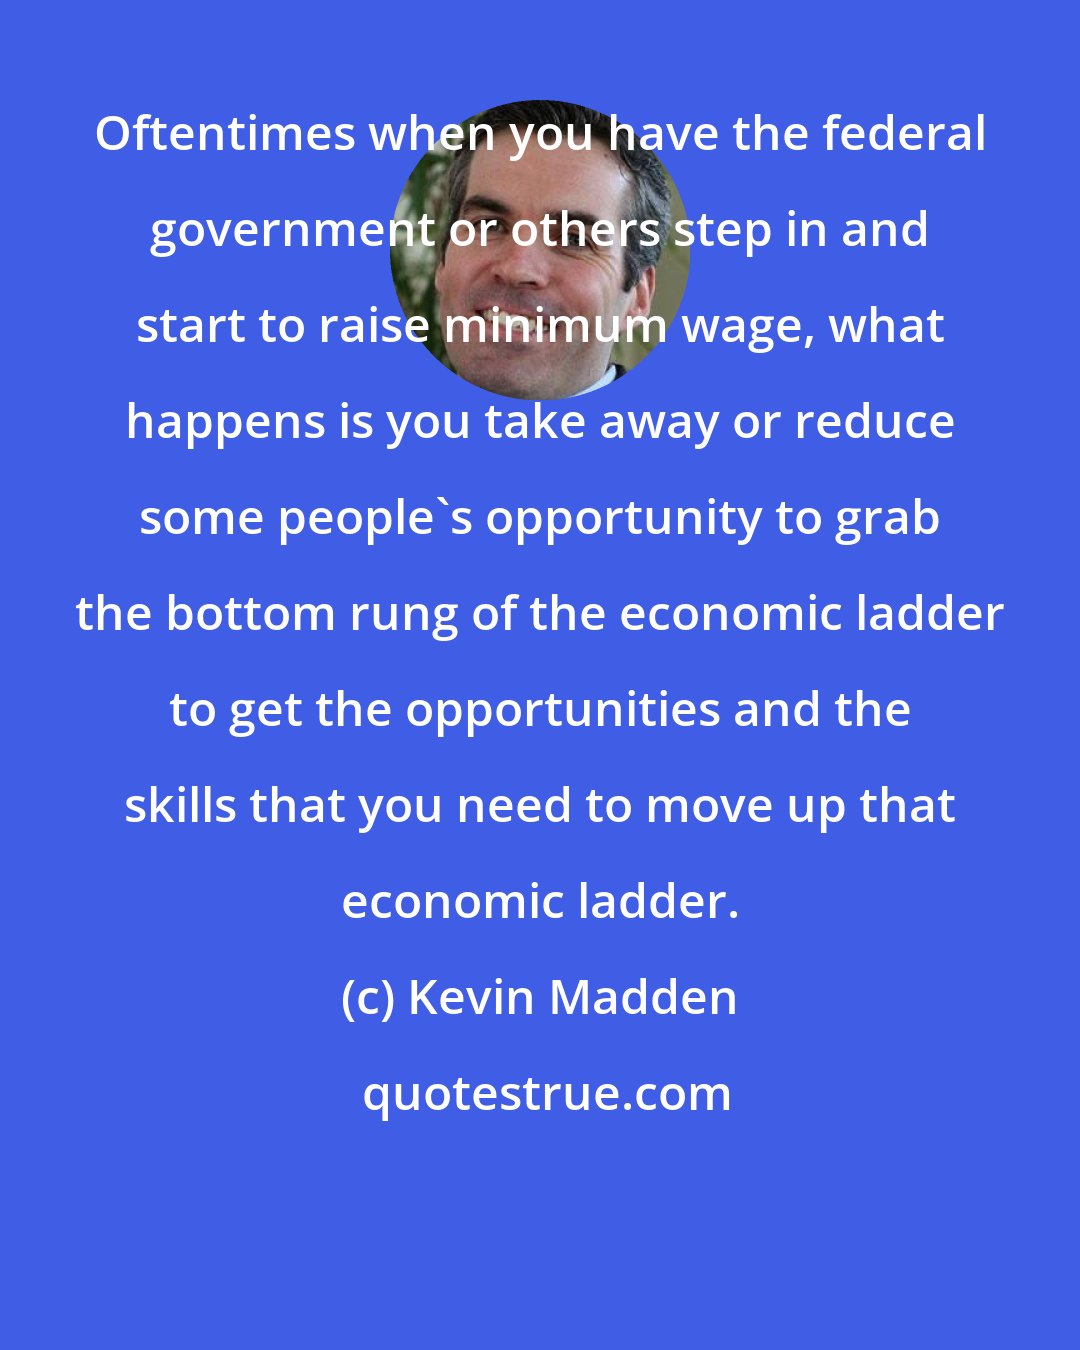 Kevin Madden: Oftentimes when you have the federal government or others step in and start to raise minimum wage, what happens is you take away or reduce some people's opportunity to grab the bottom rung of the economic ladder to get the opportunities and the skills that you need to move up that economic ladder.